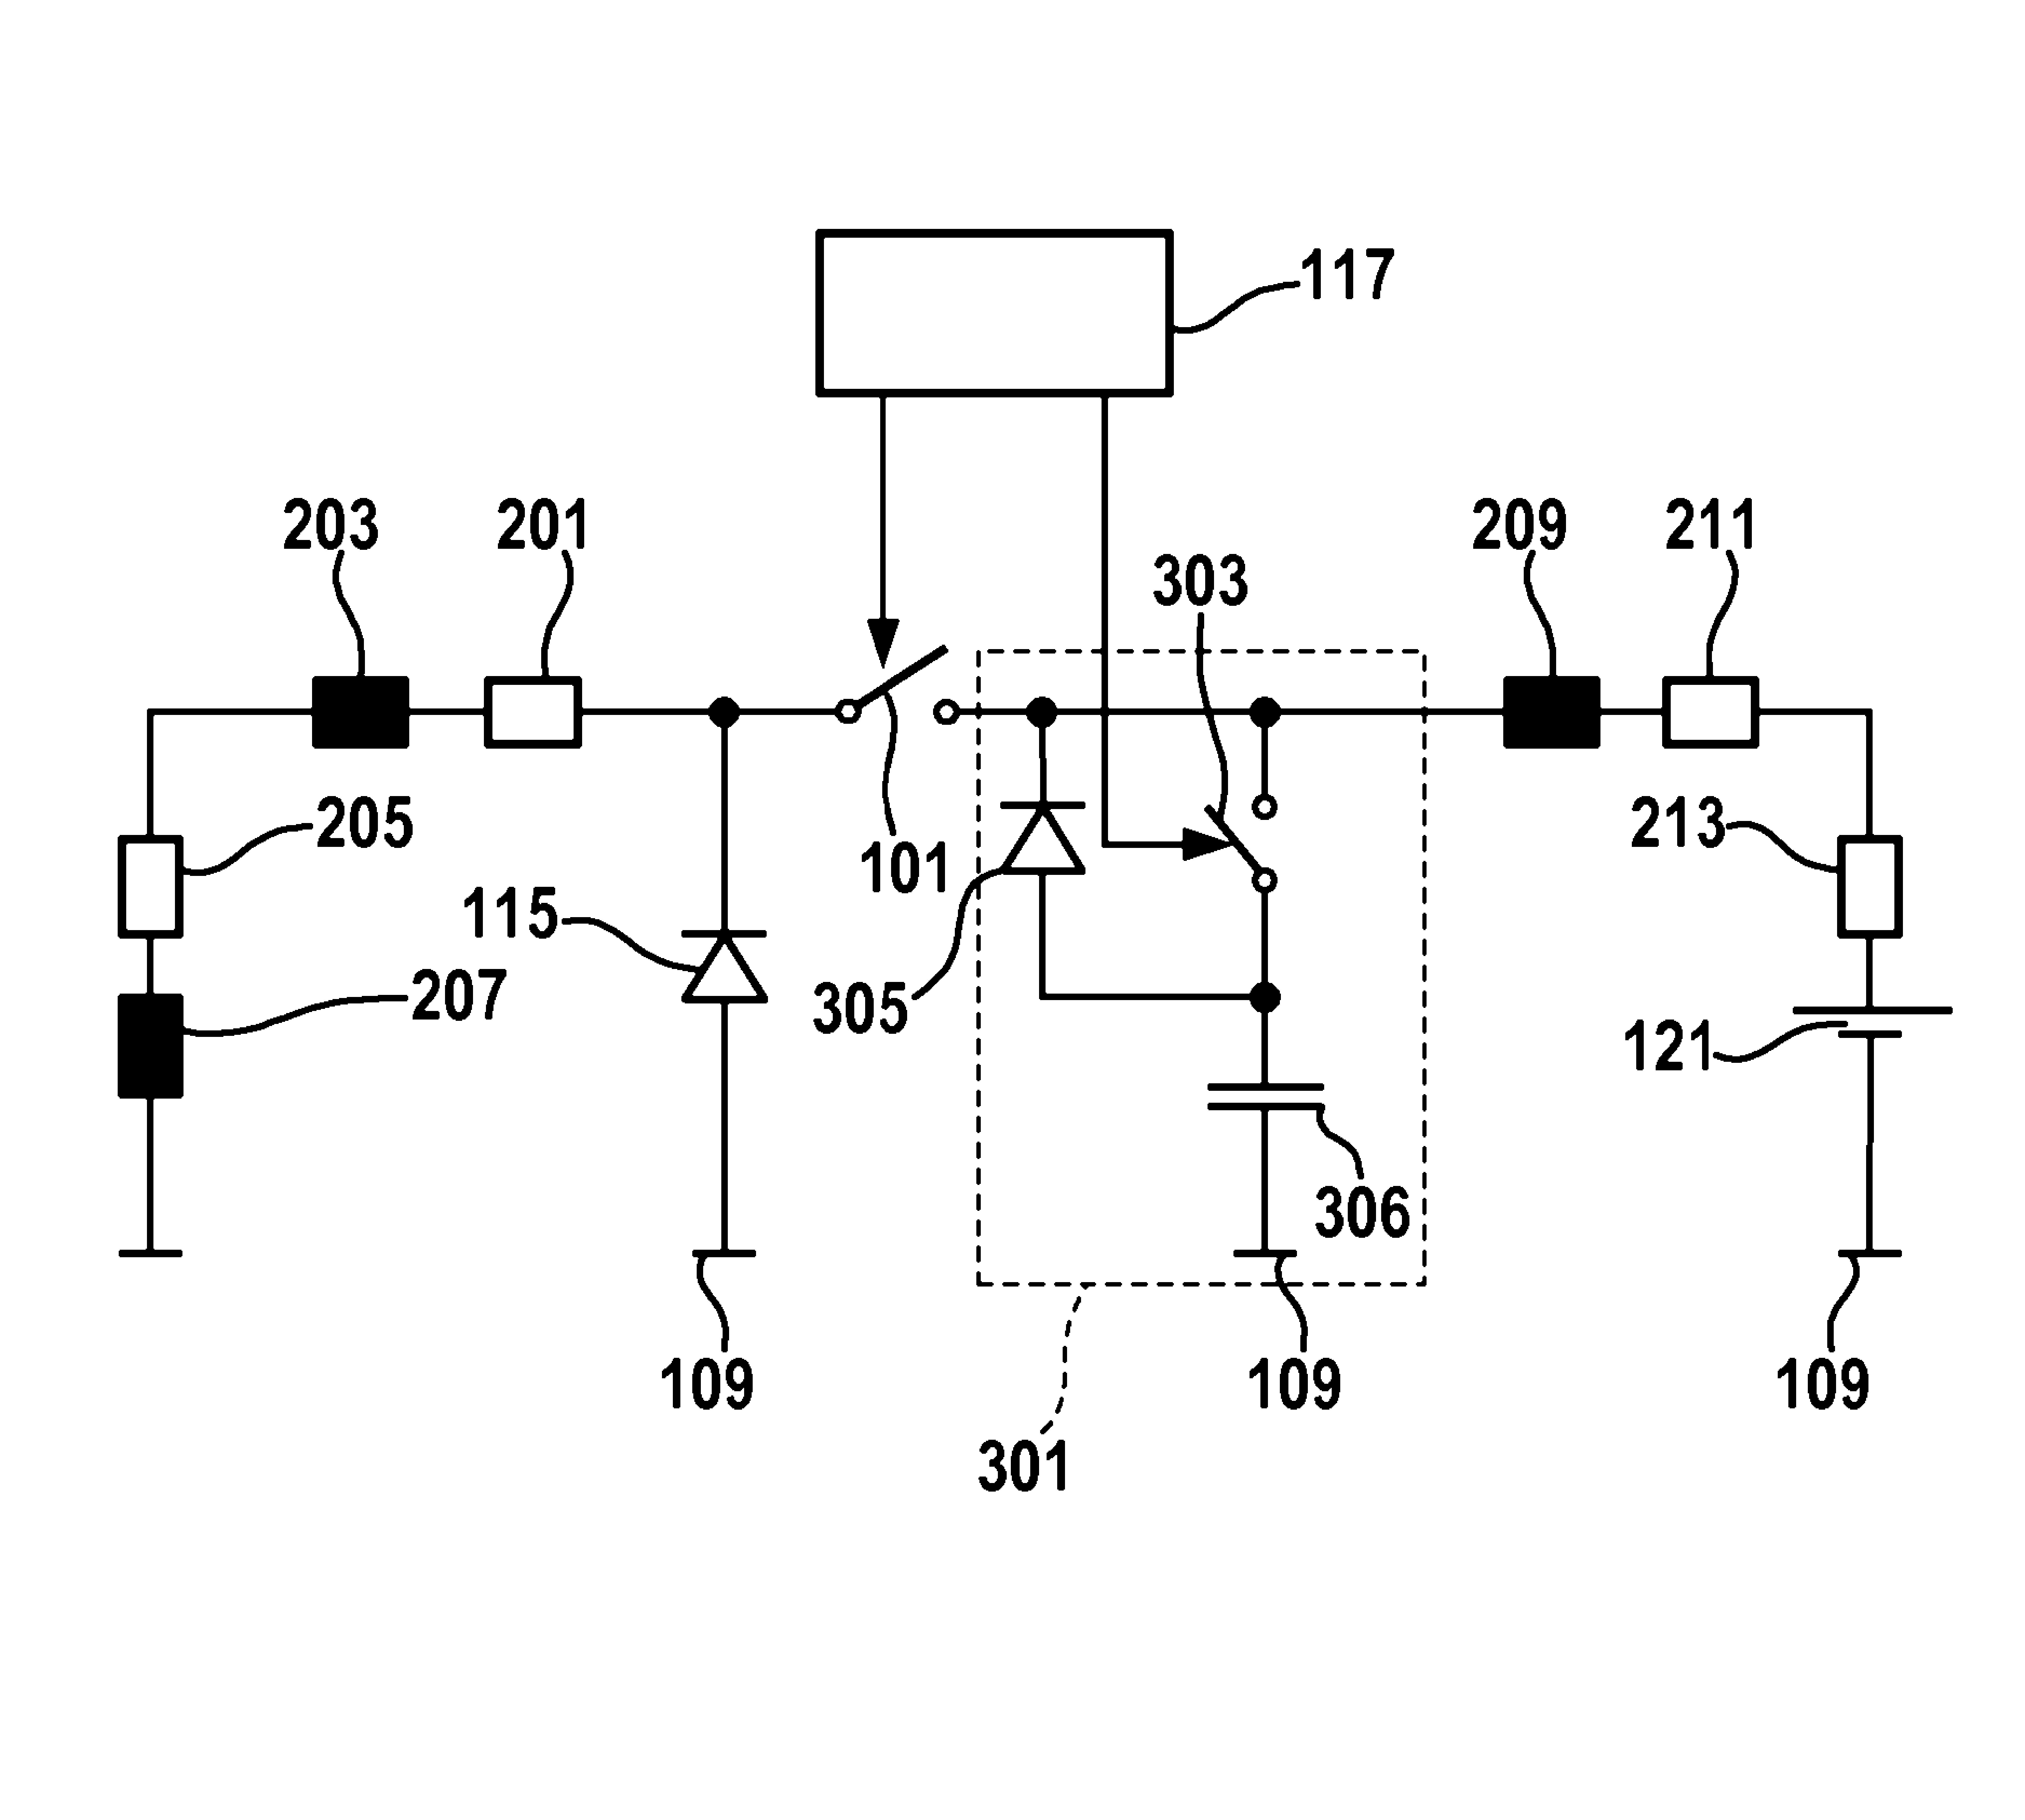 Apparatus for supplying electrical power to an electric motor